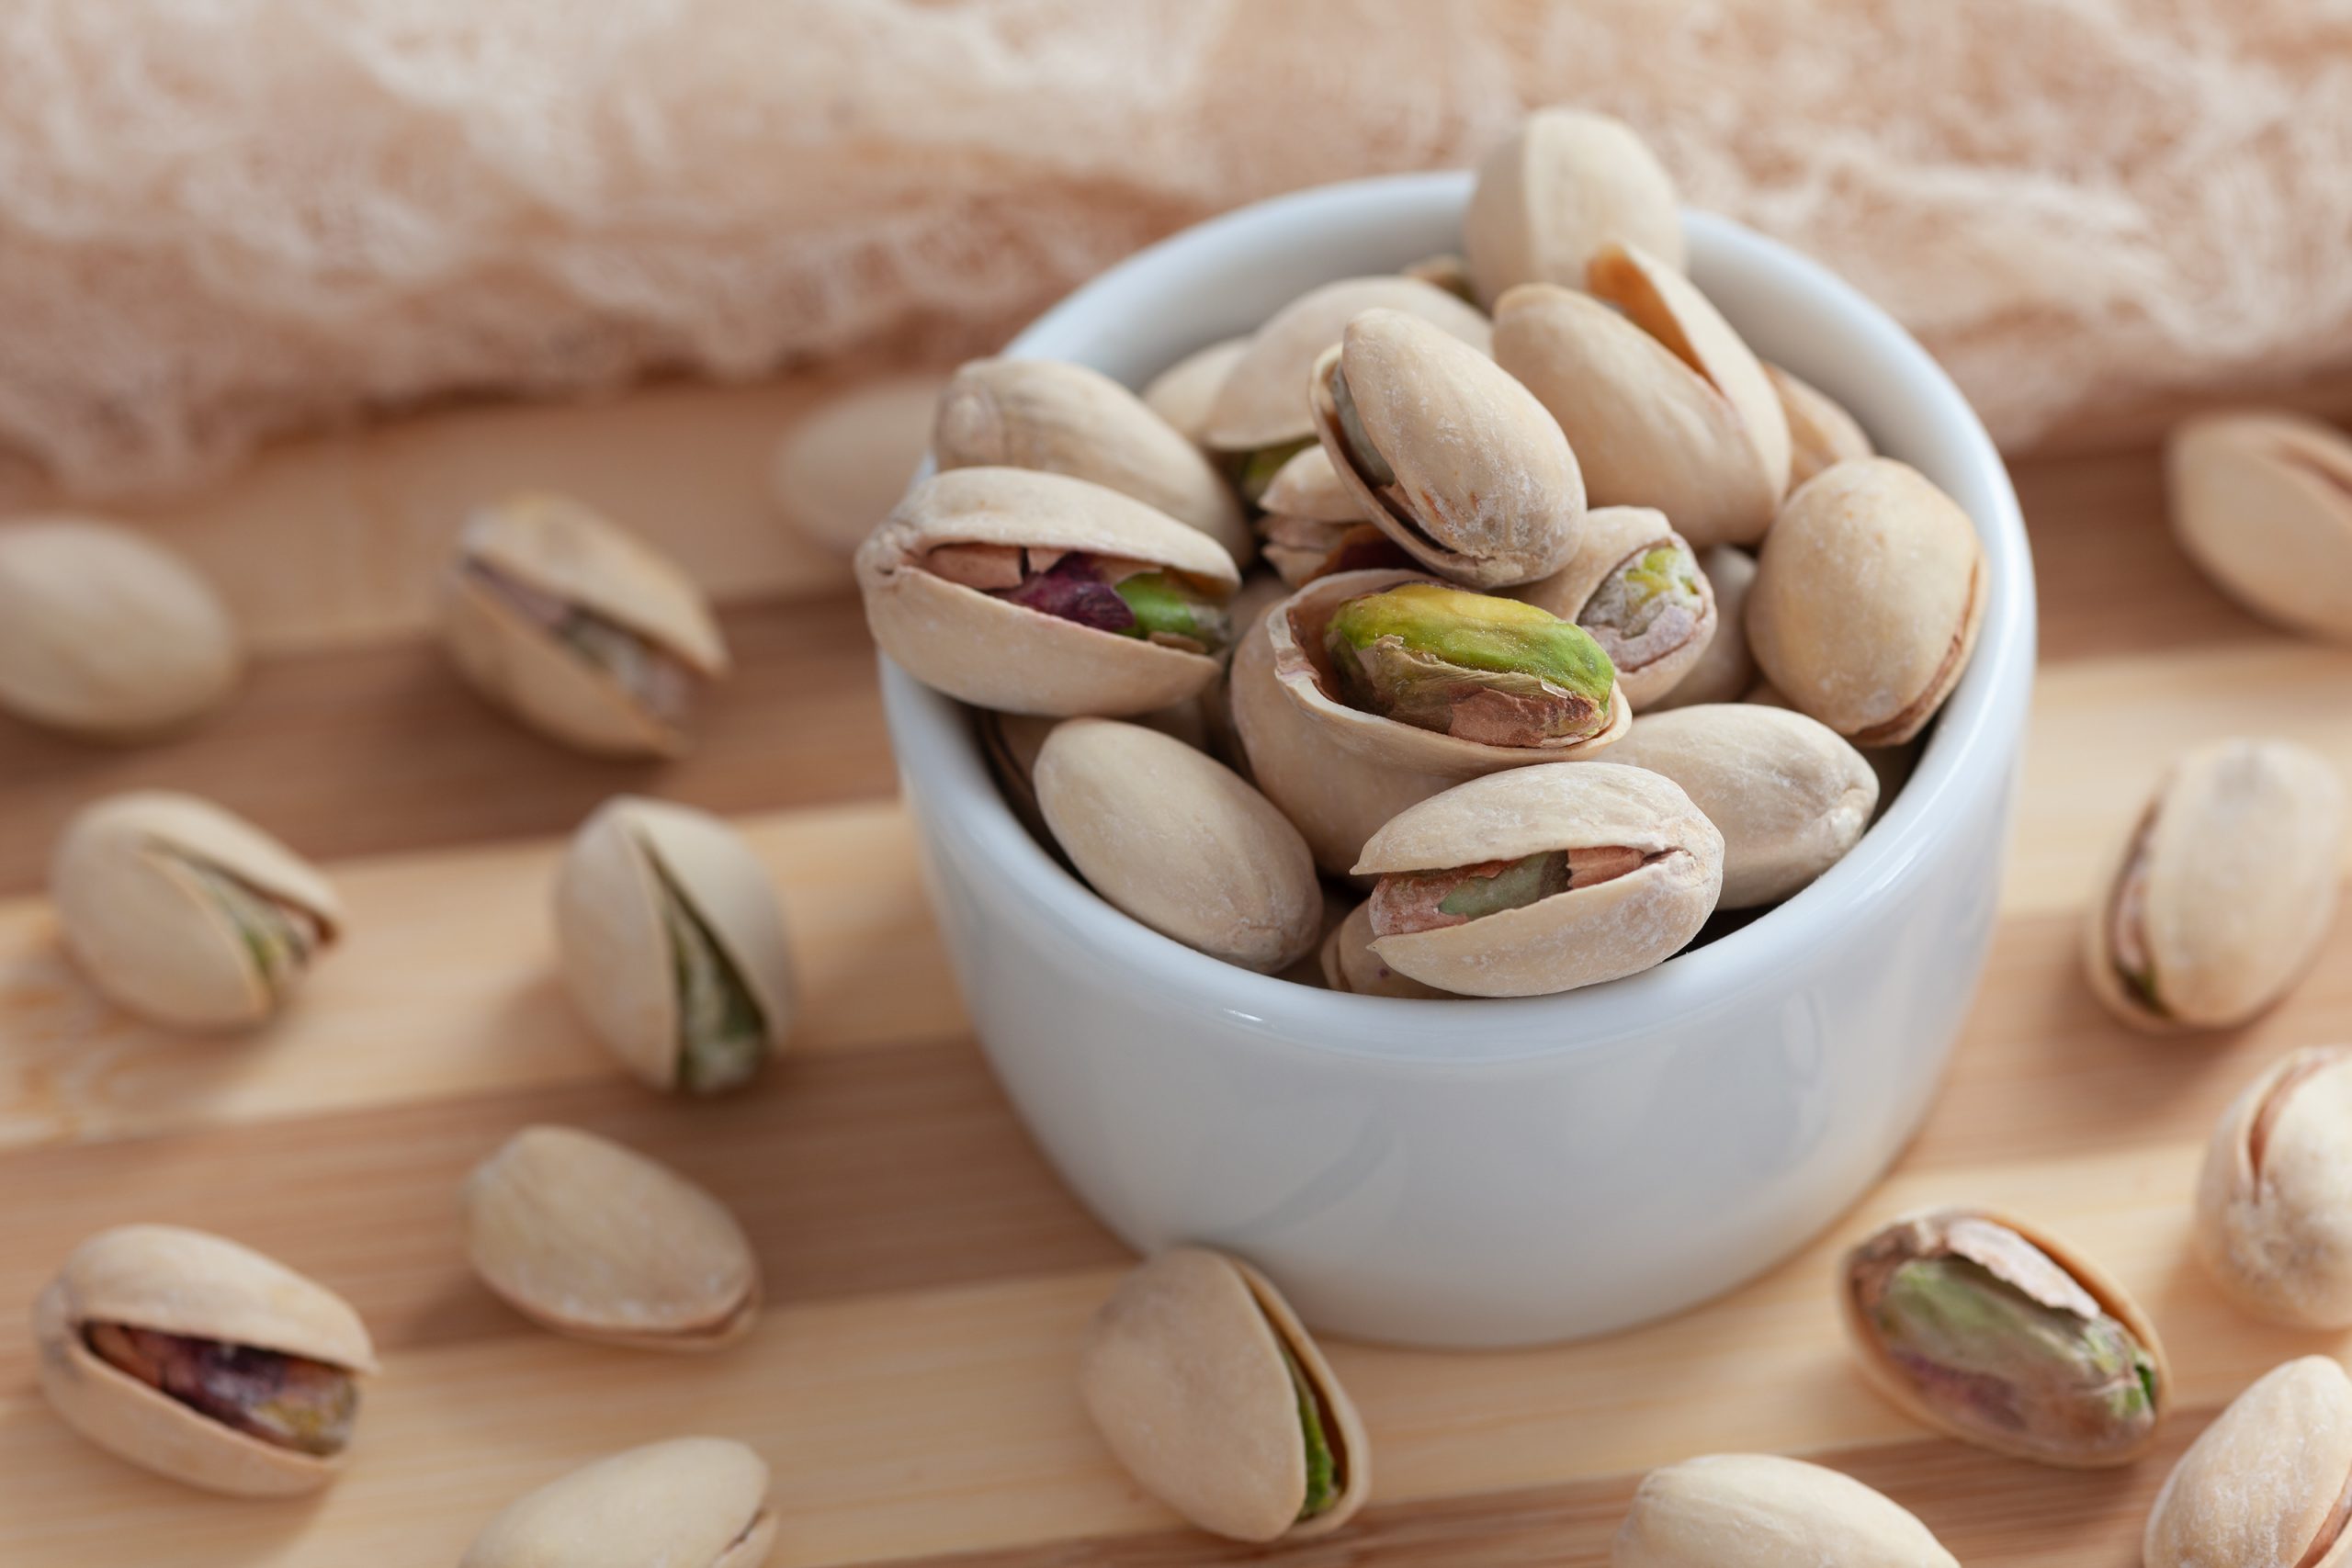 Man arrested over theft of 19 tons  of pistachios